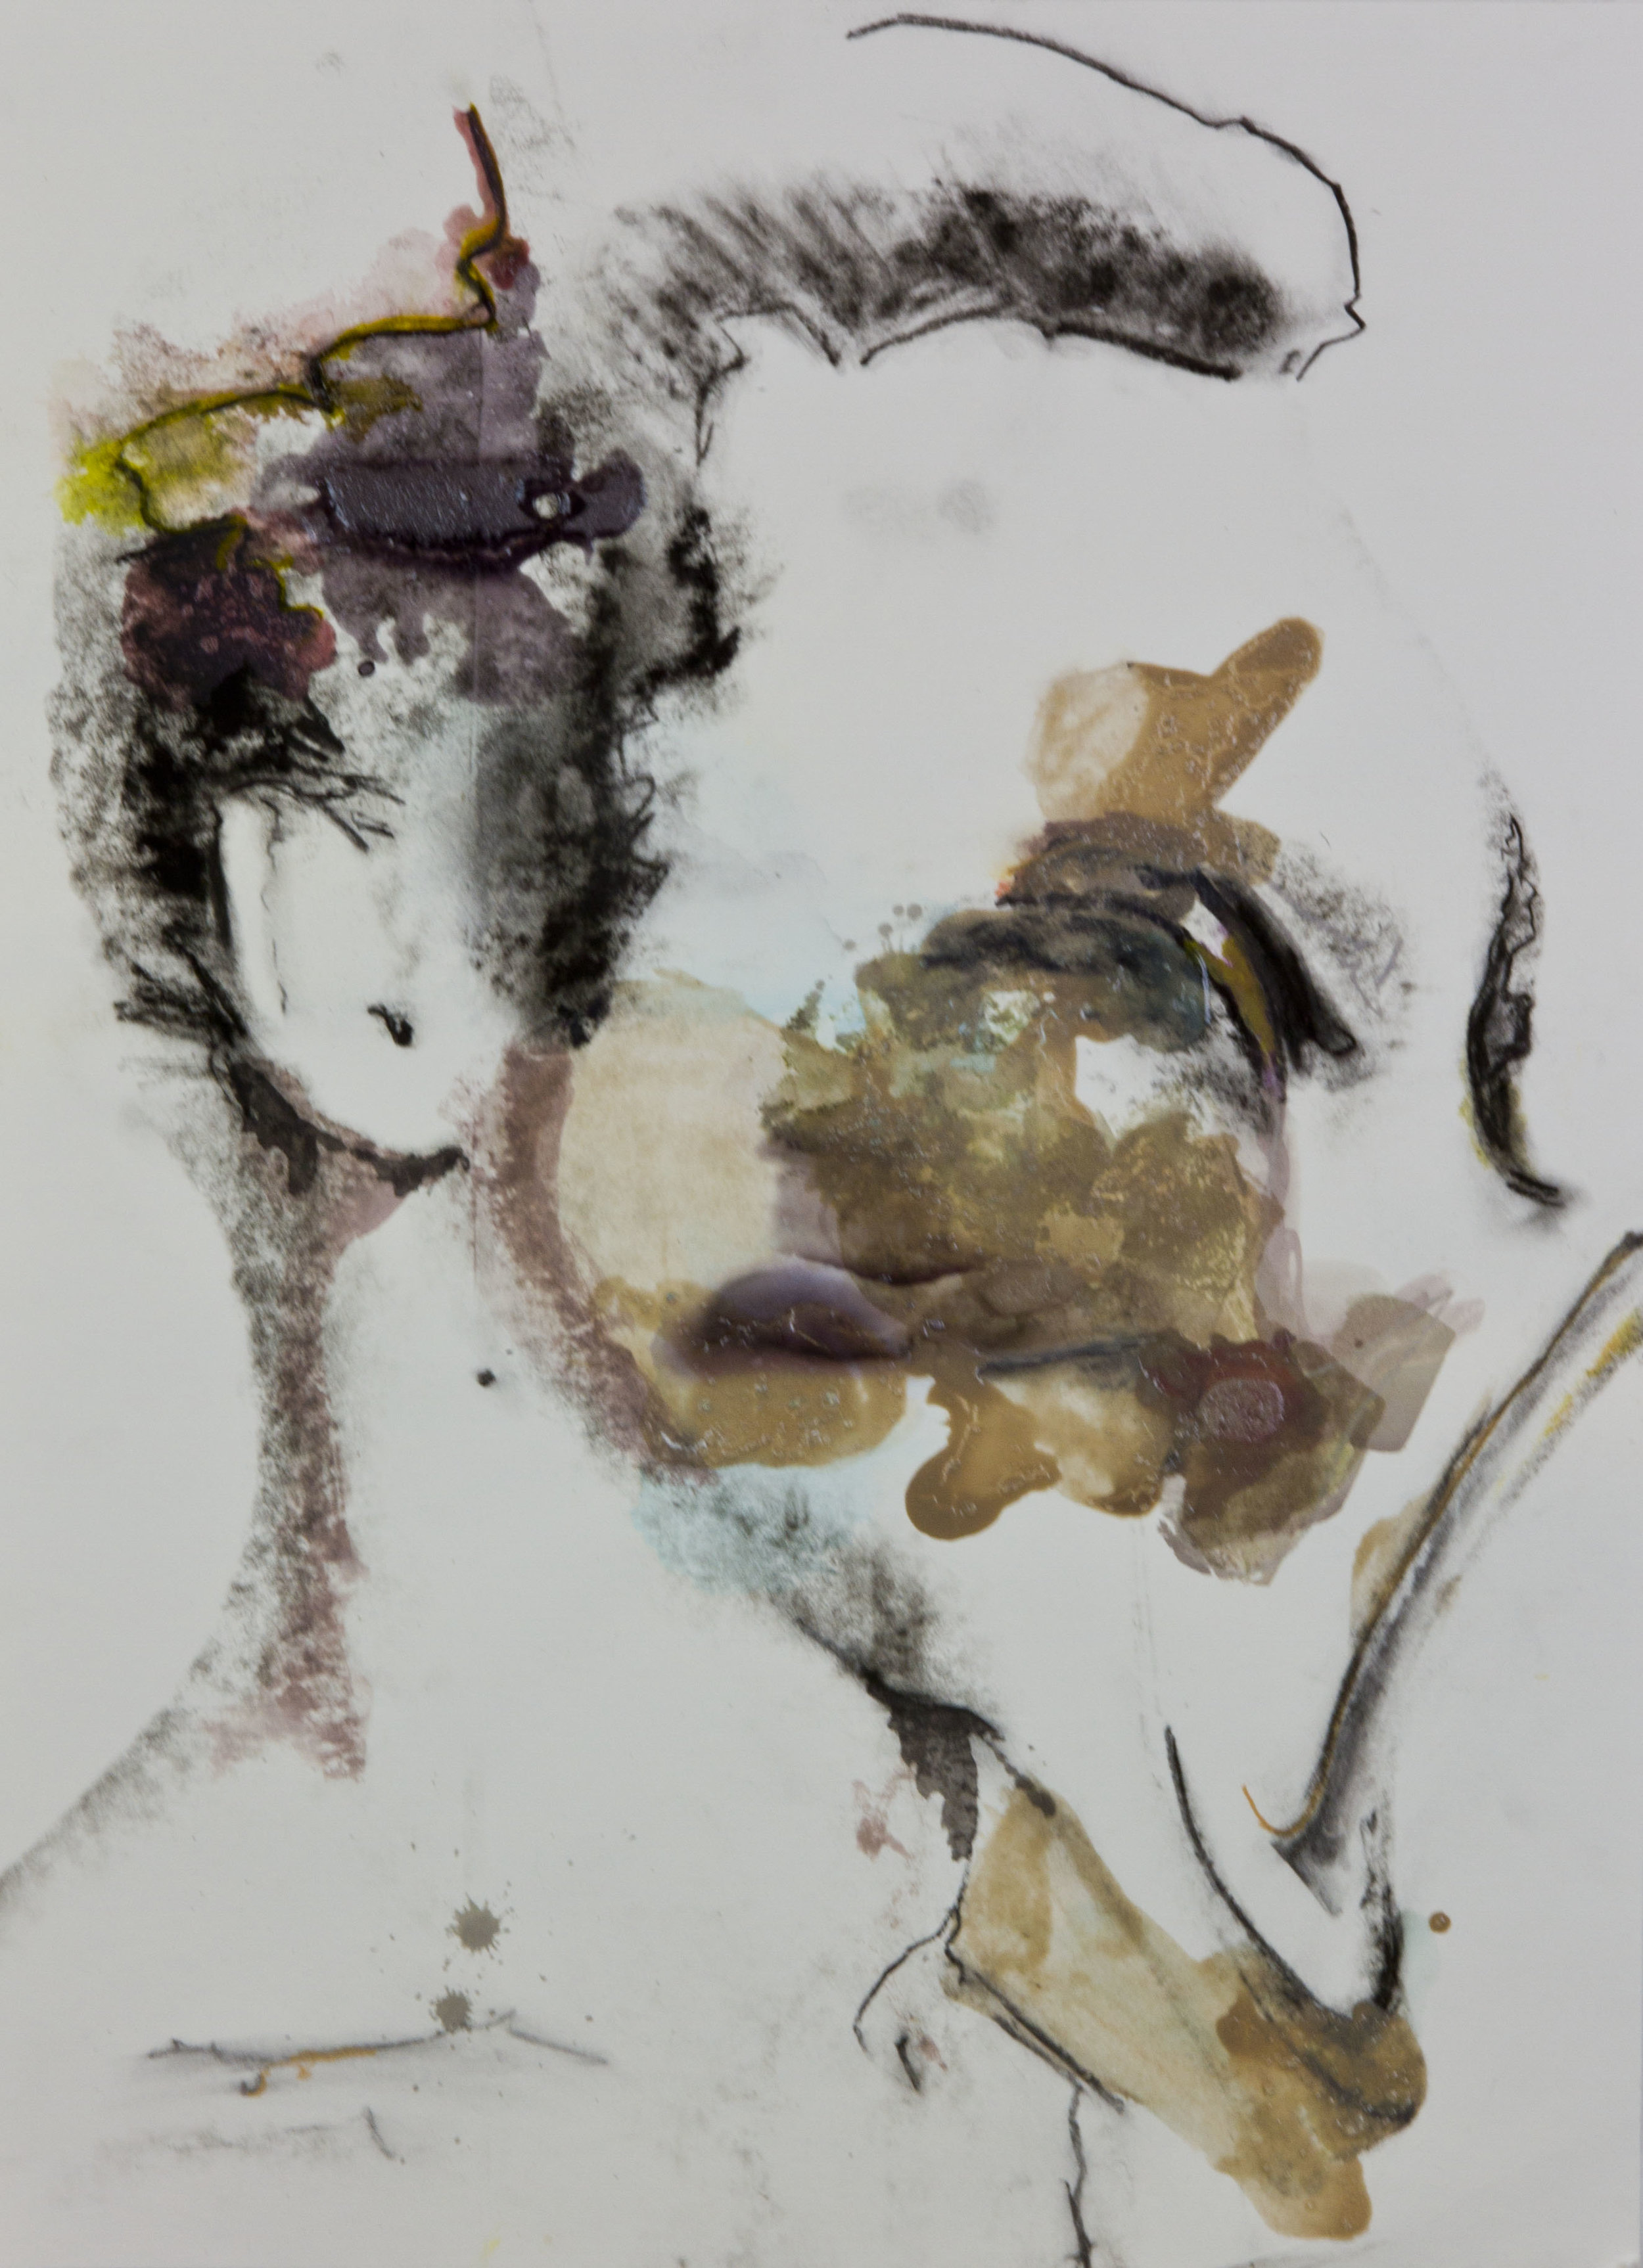 Mudslide Face, 2012, watercolor, acrylic and ink transfer on paper, 22x30 inches